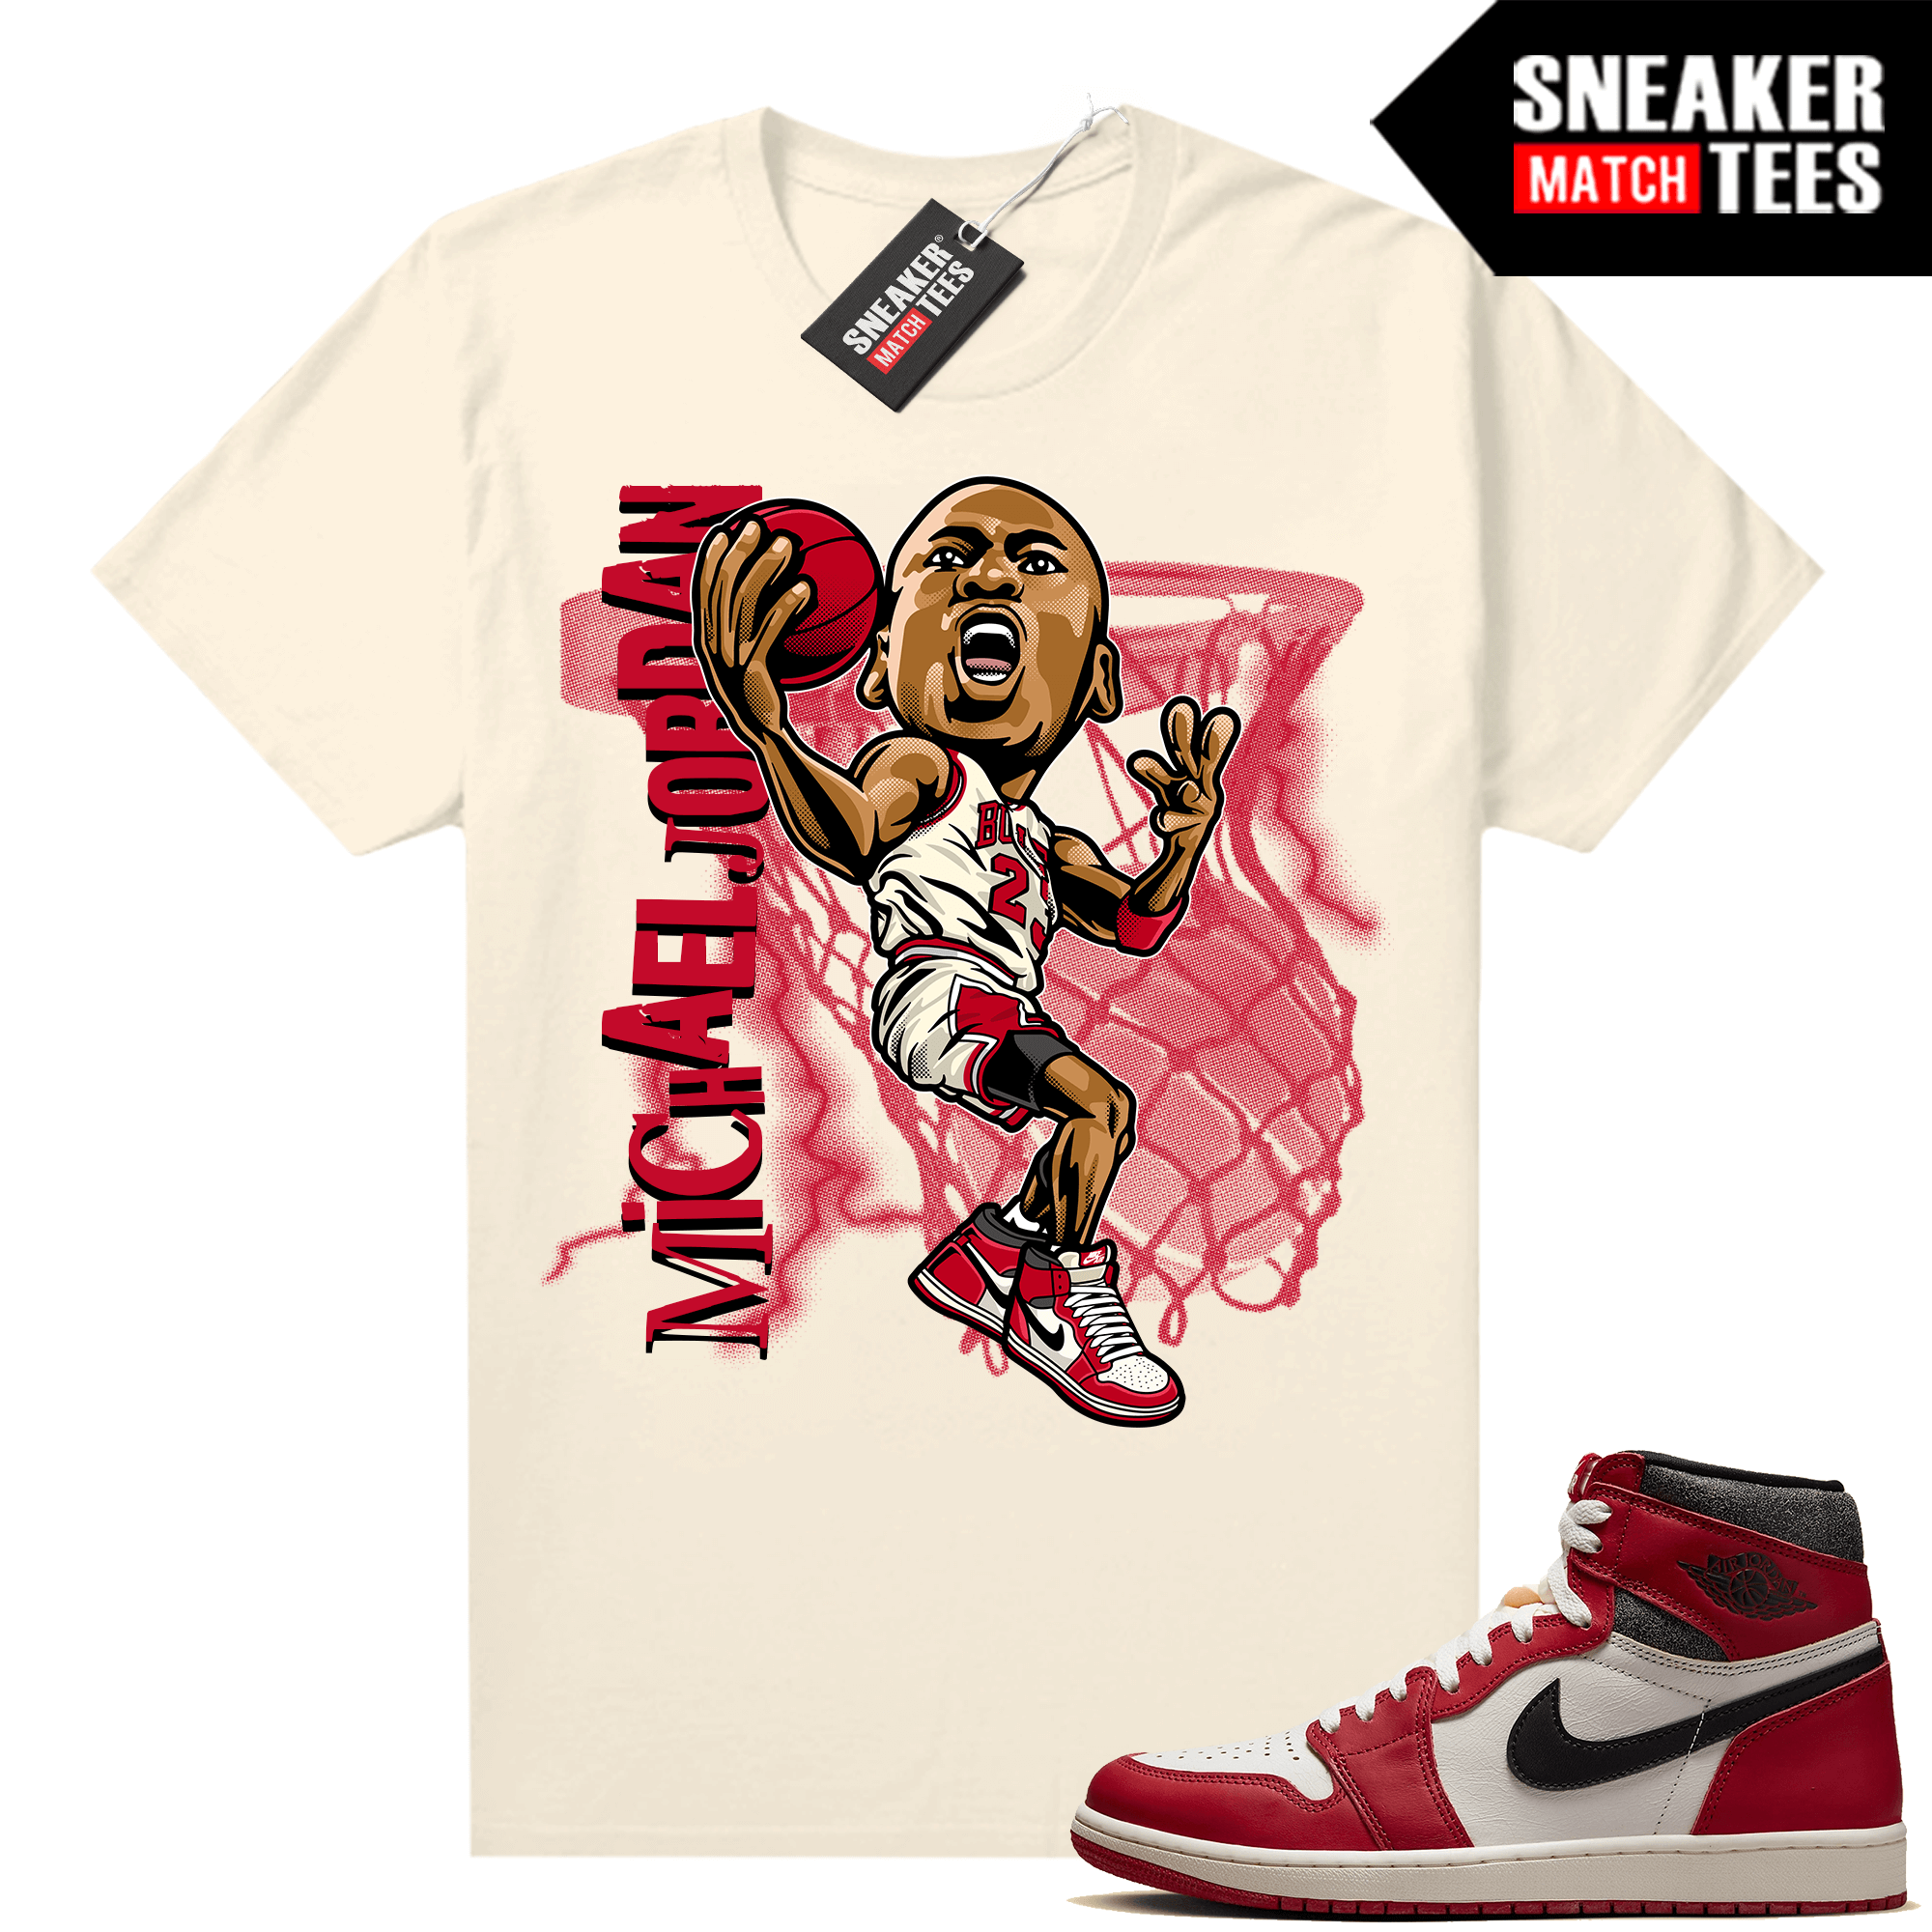 Chicago 1s Lost and Found Runtrendy Sneaker Match Shirt MJ Showtime